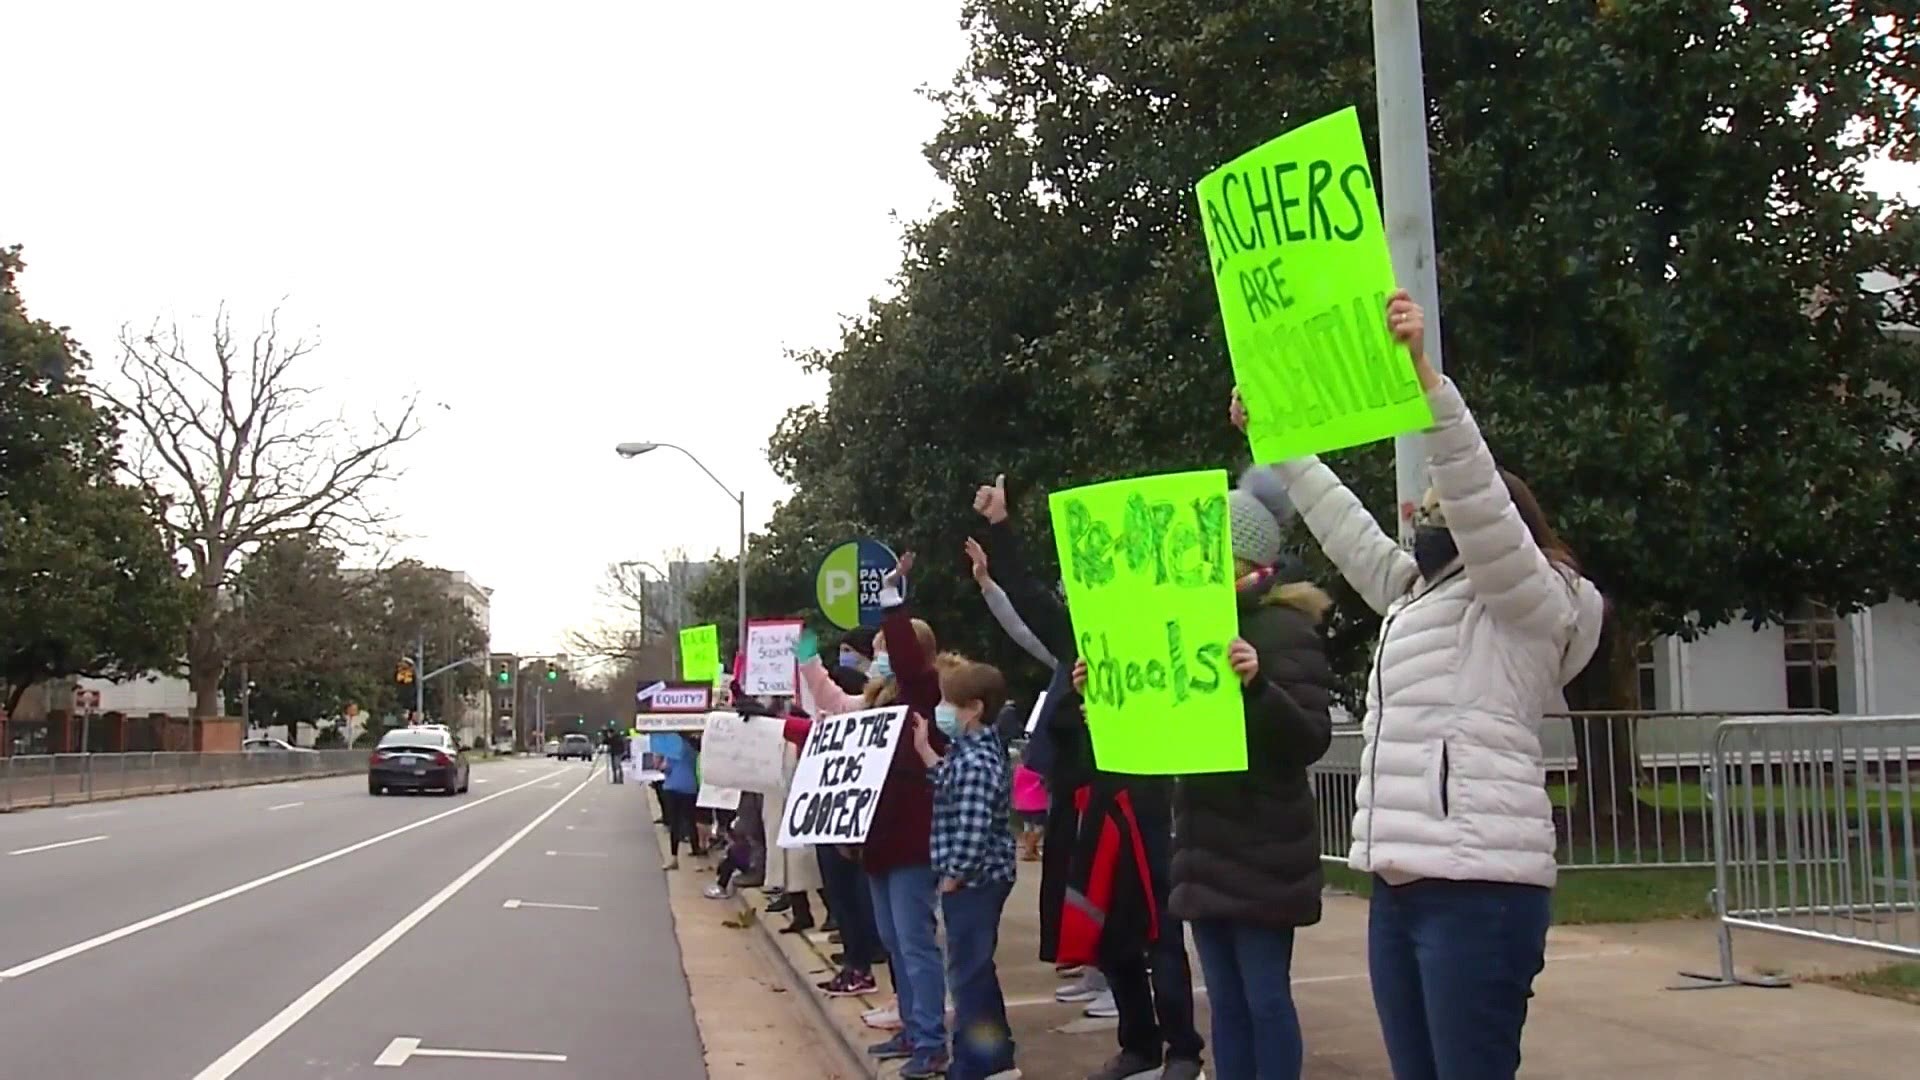 Over the weekend, more than 100 people gathered in Raleigh, demanding the NC schools reopen now.